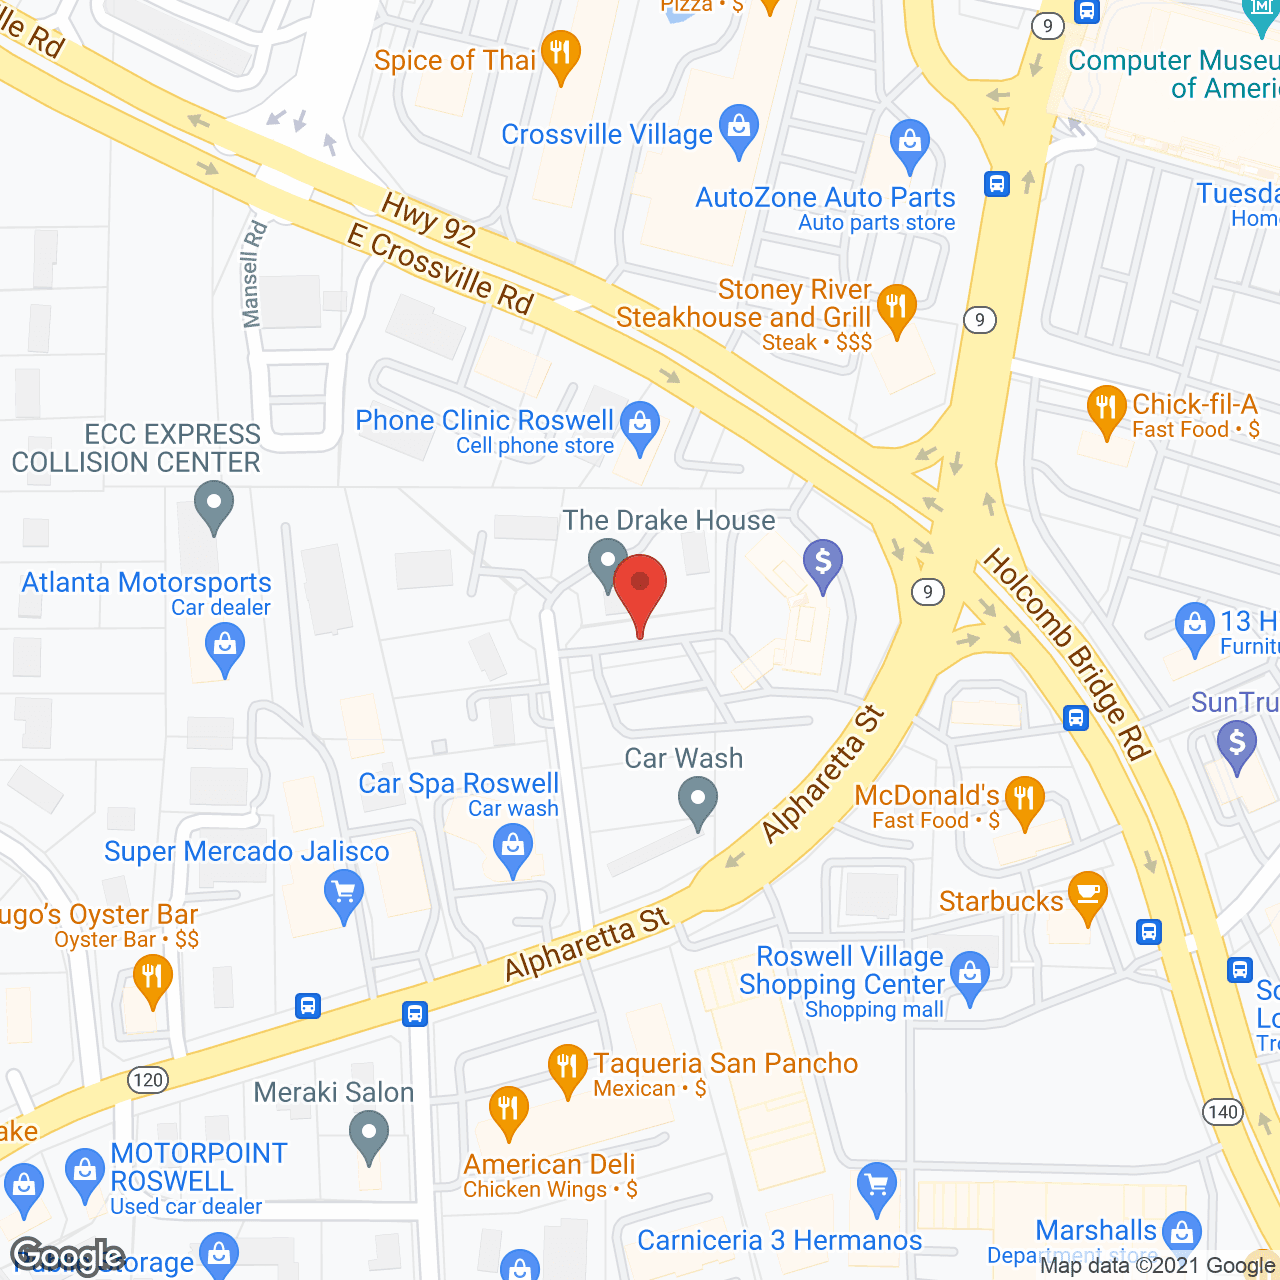 Health Service Ctr in google map